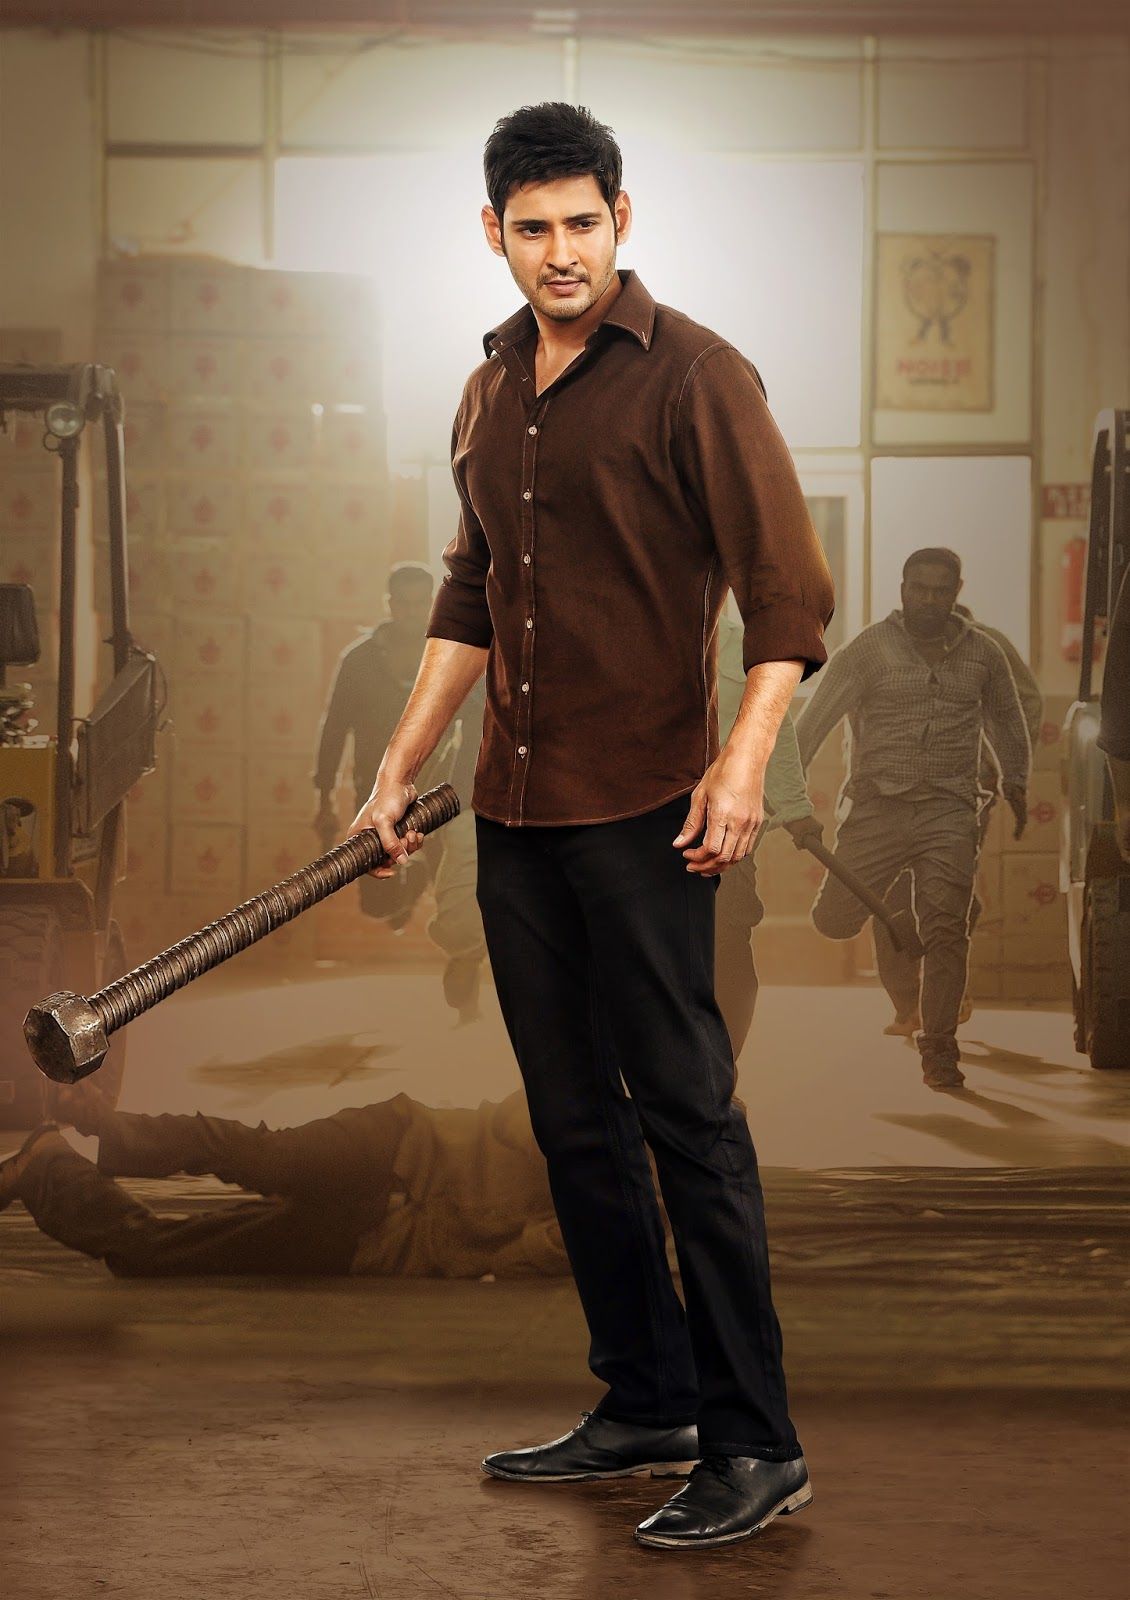 indianow: srimanthudu wallpaper hd